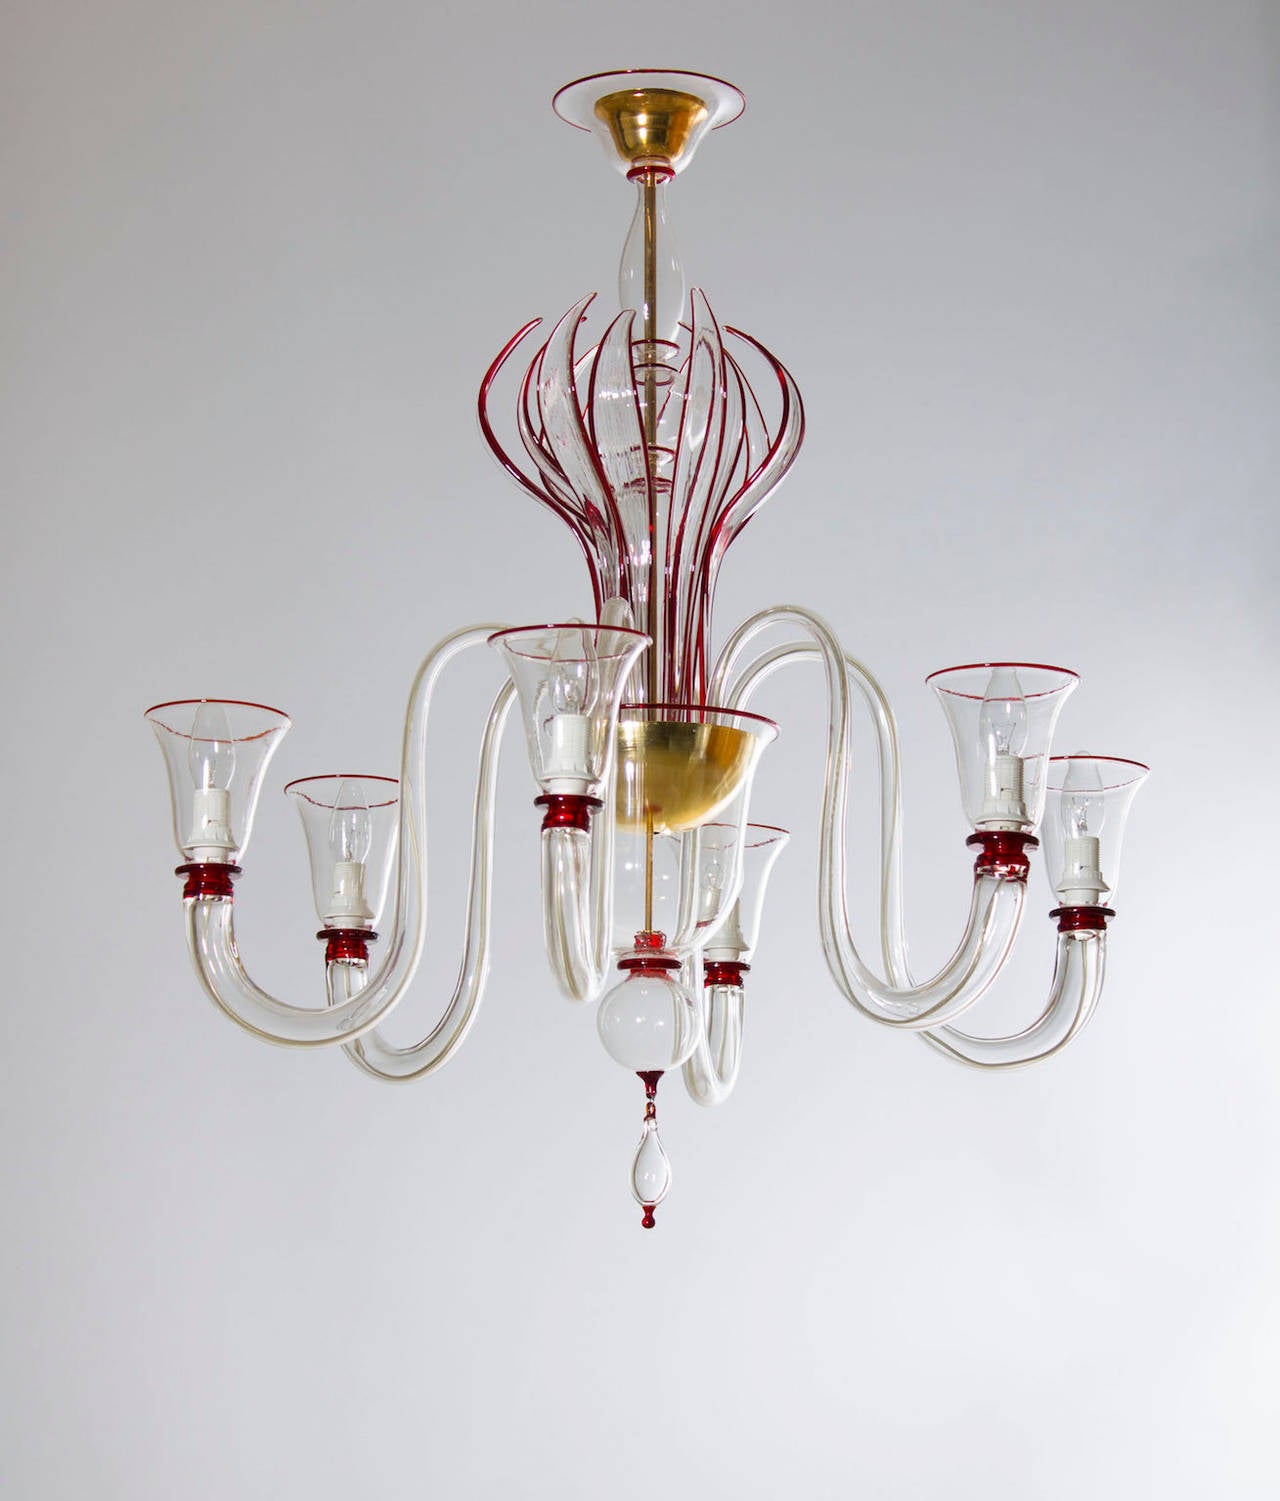 Particular Italian Murano chandelier, in amazing transparent color with red
refinishing, in excellent original condition from circa 1990s, composed by six arms, and with in the center a fantastic group of curved swords around of the sphere of the